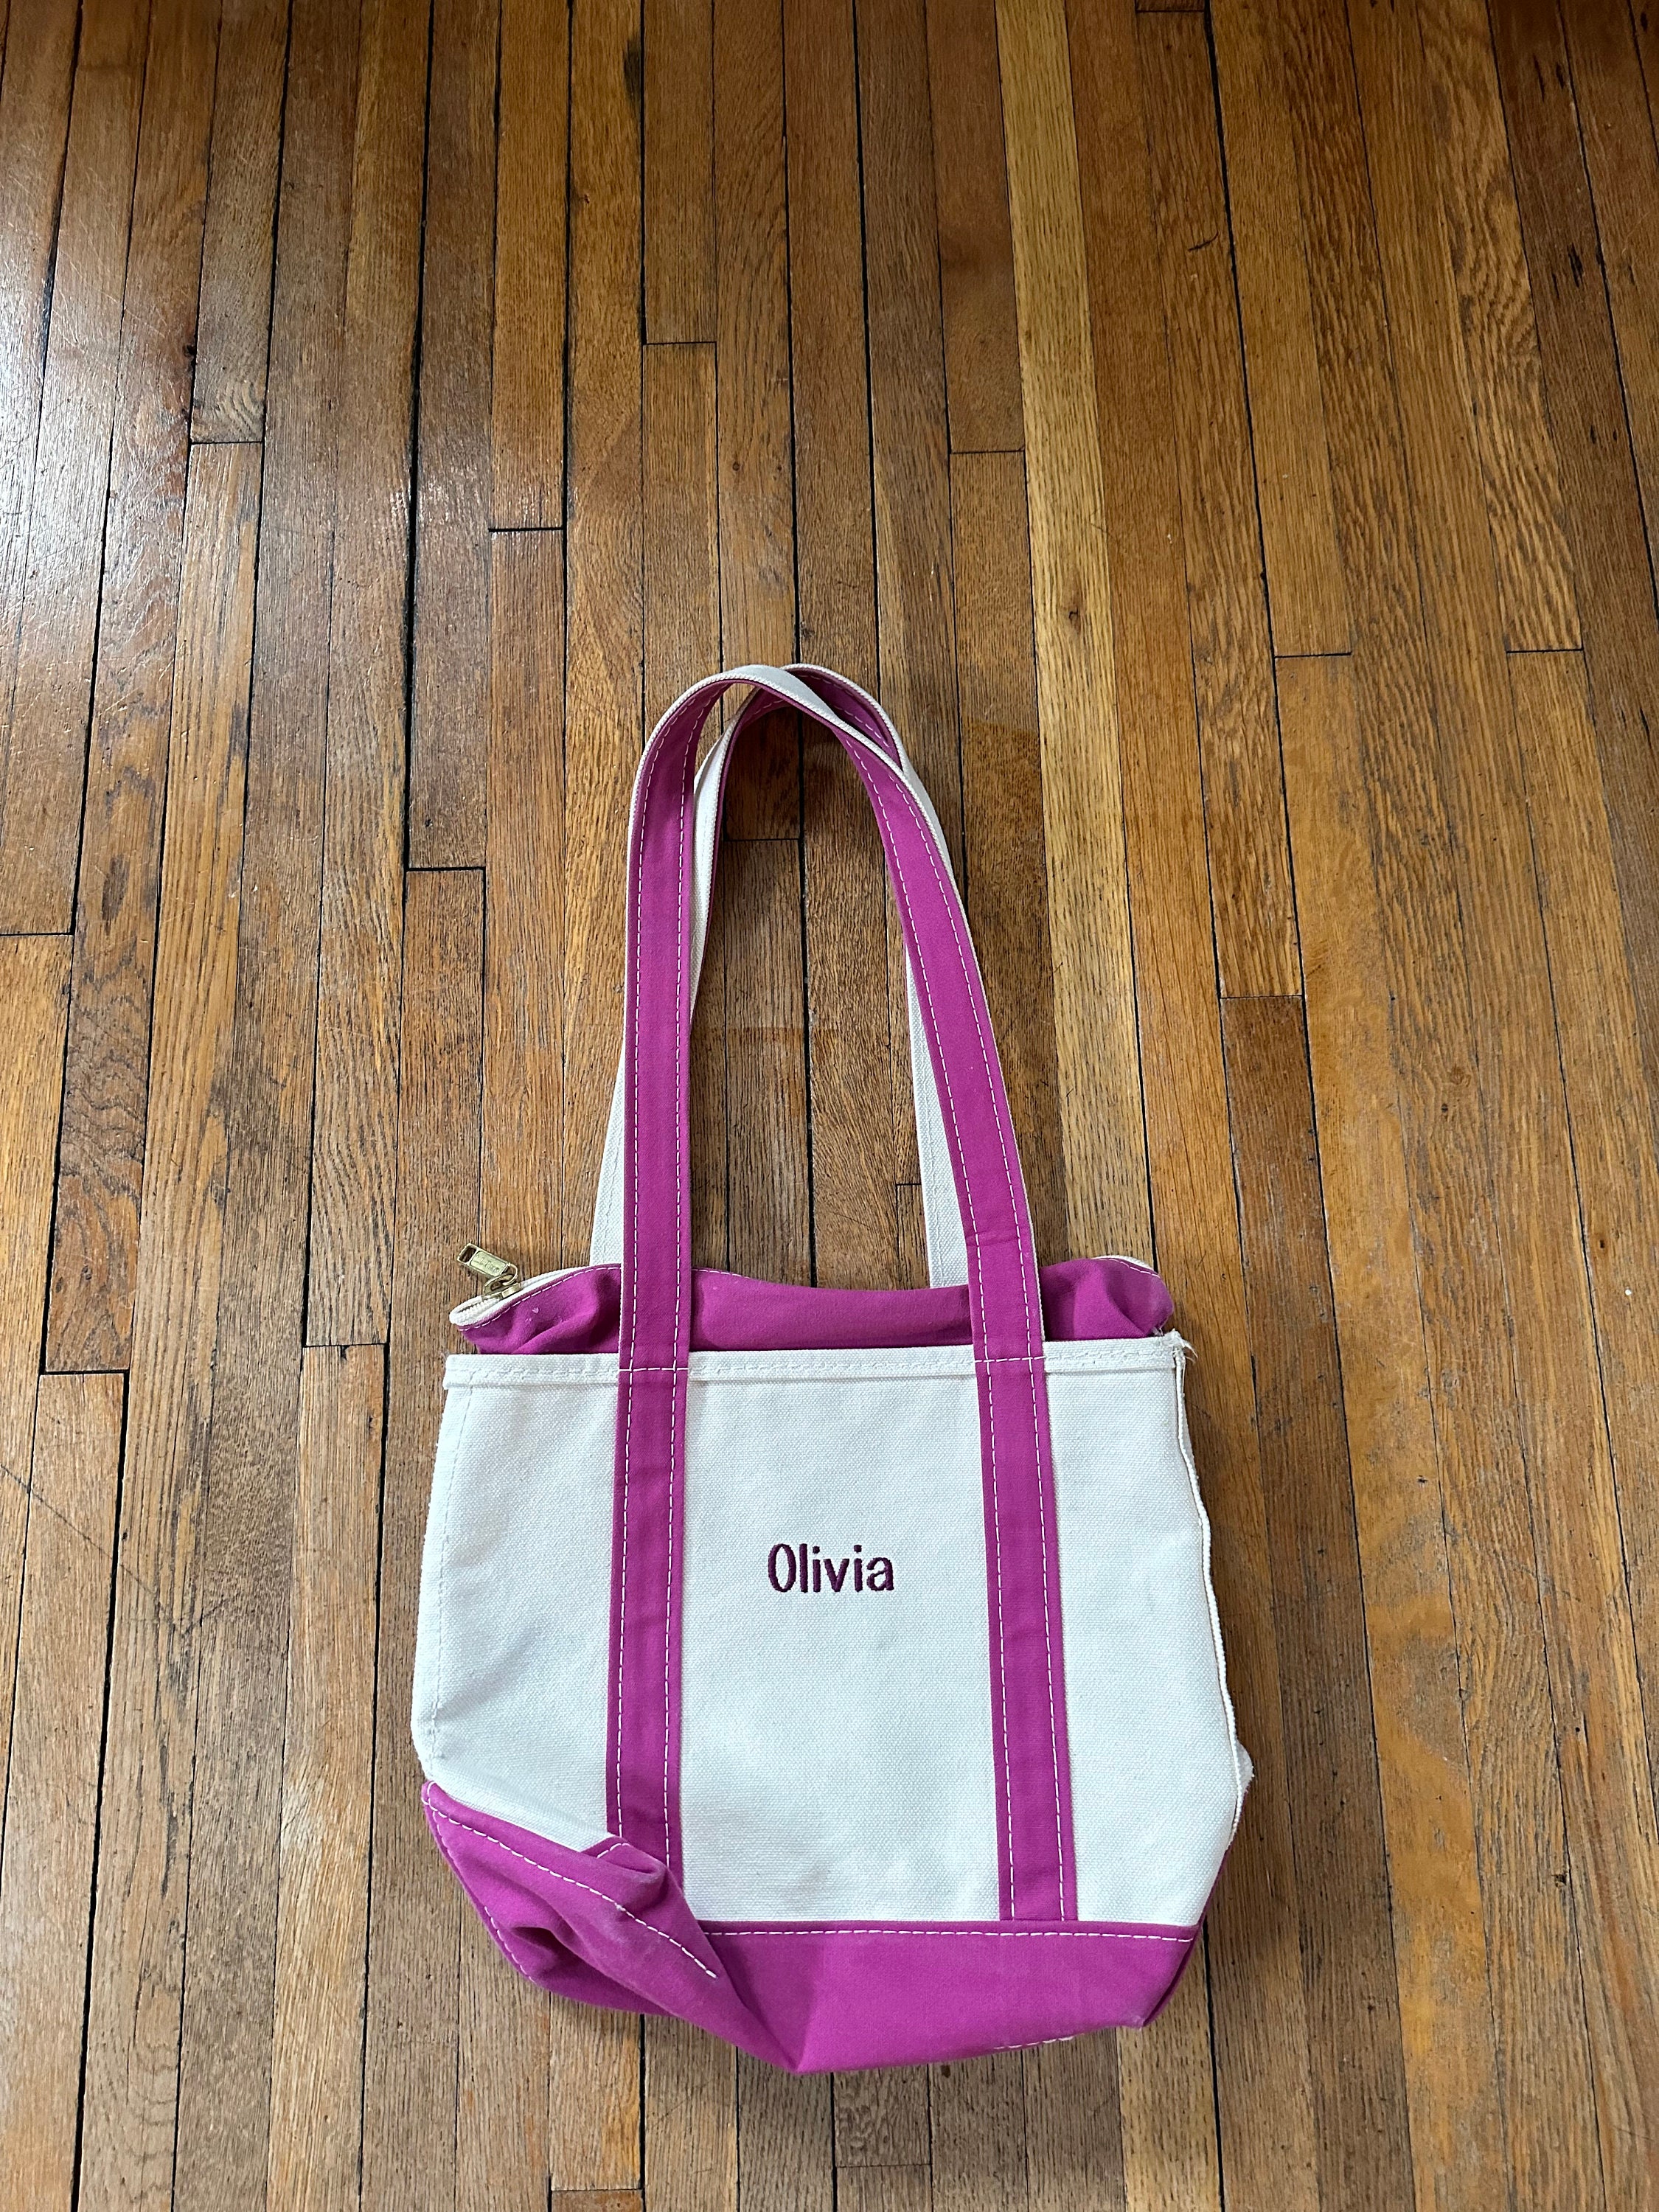 Best boat and tote monograms 👏 #llbeantote #llbean #boatandtote #icon, Tote  Bag